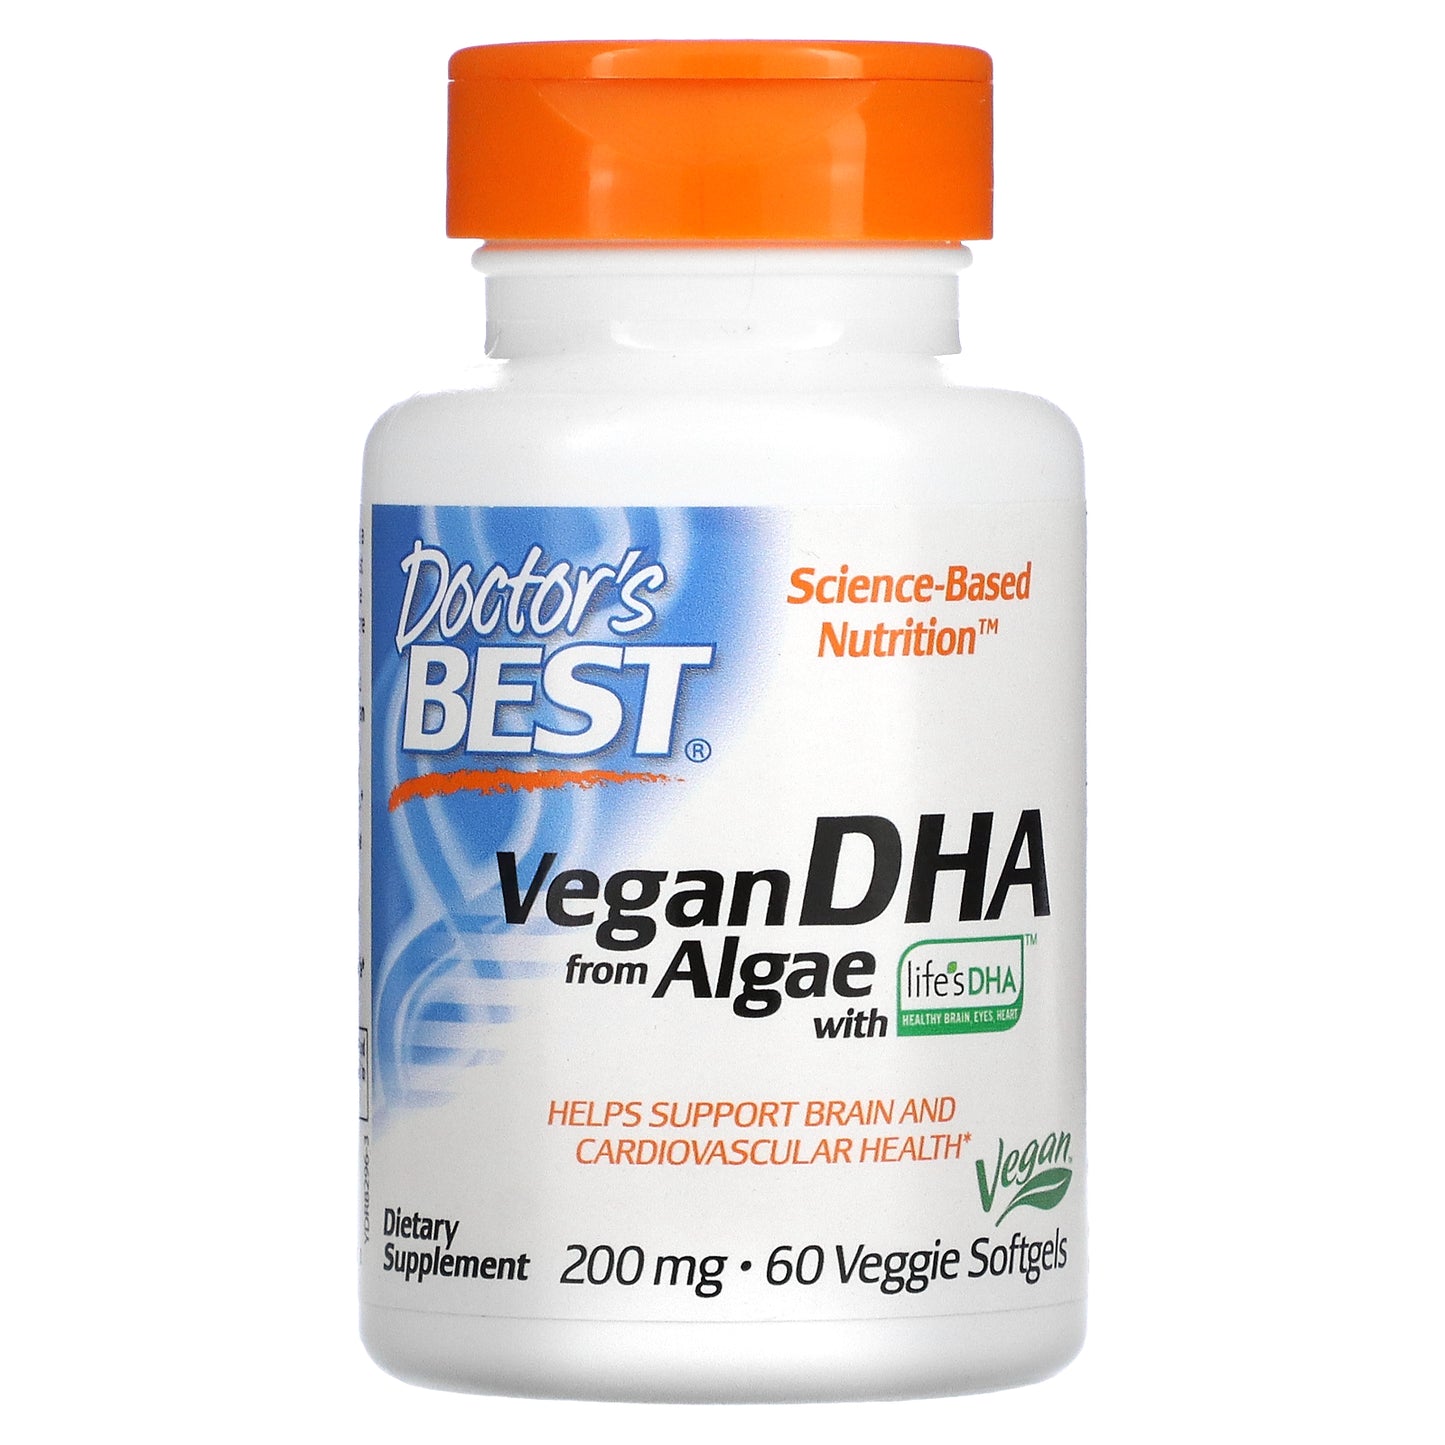 Doctor's Best Vegan DHA from Algae with Life's DHA, 200 mg, 60 Veggie Softgels